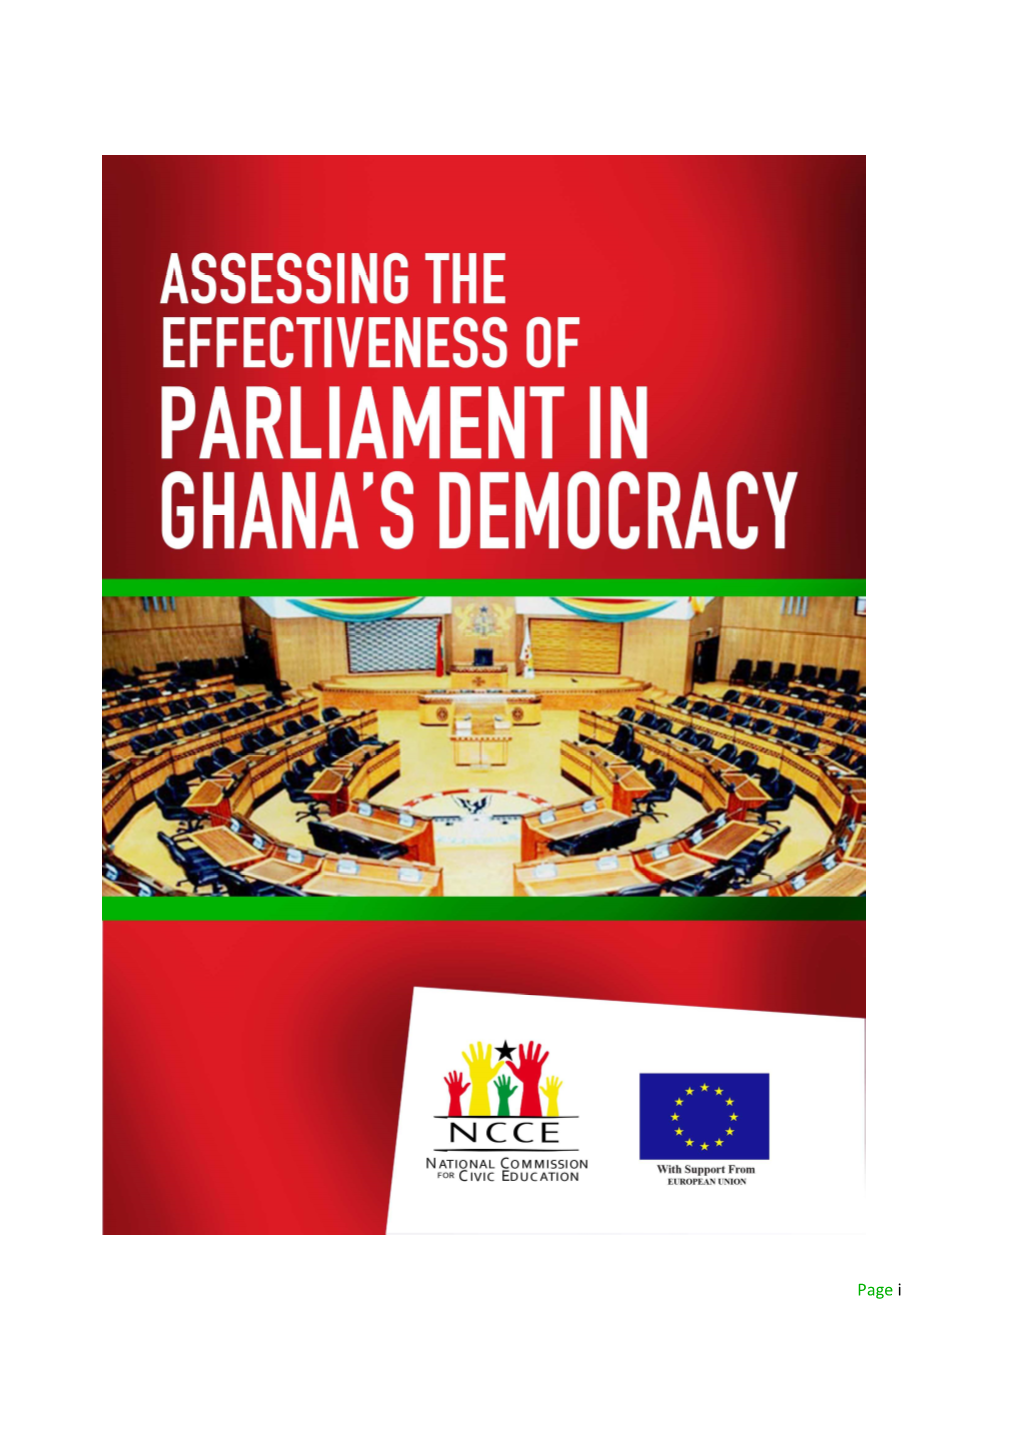 NCCE Report April 2015 Assessing the Effectiveness of Parliament In